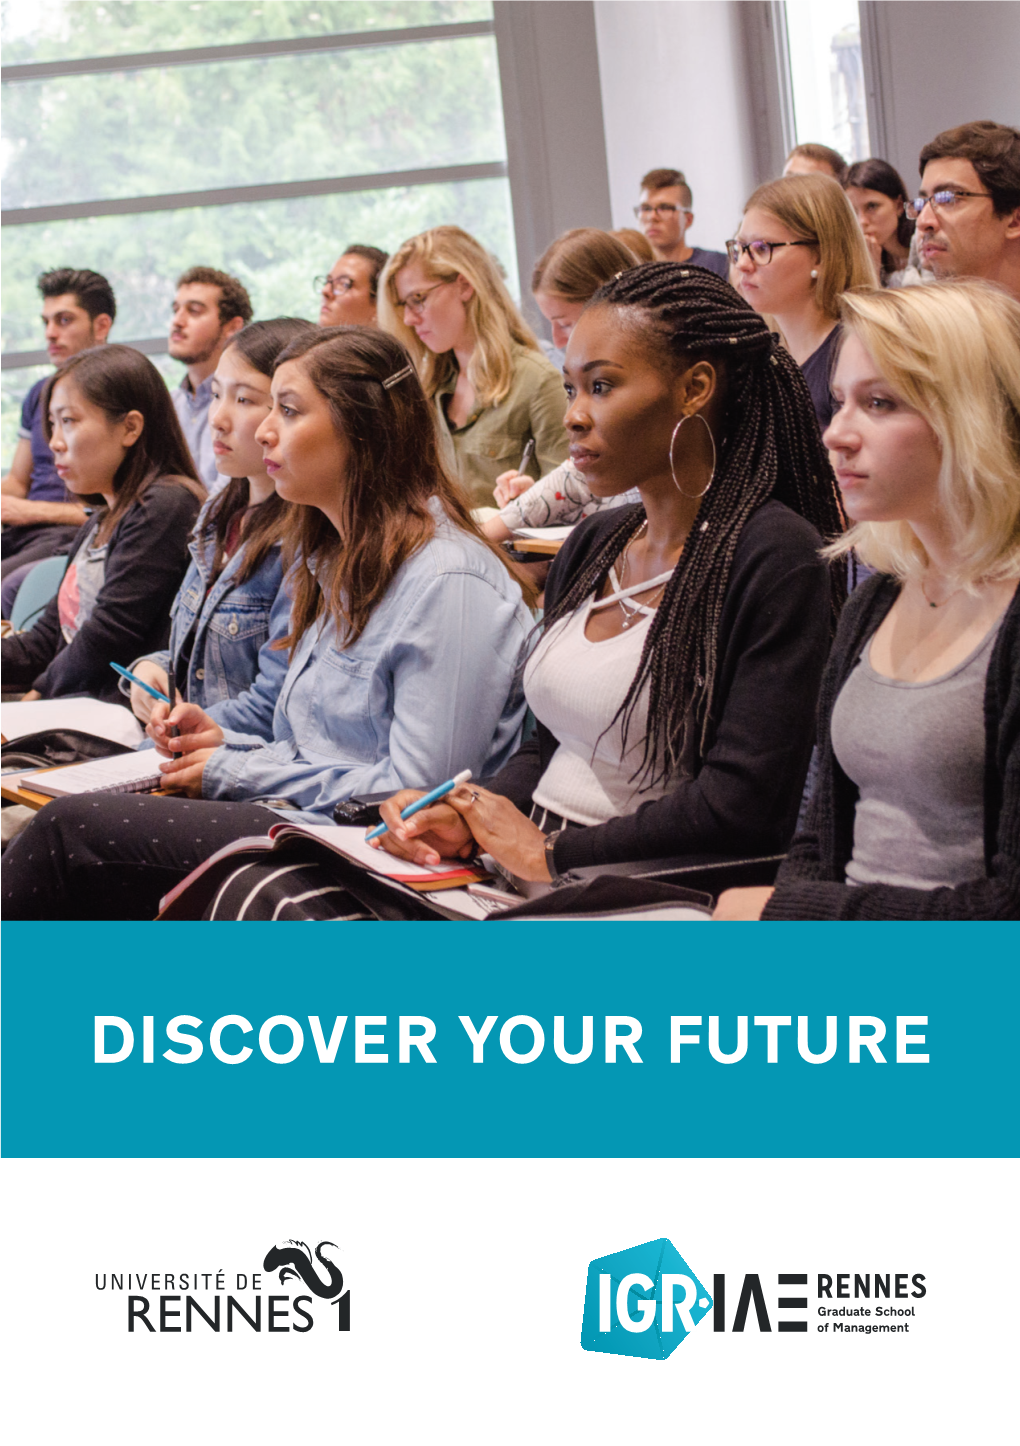 DISCOVER YOUR FUTURE Welcome to IGR-IAE RENNES University Rennes 1 Graduate School of Management